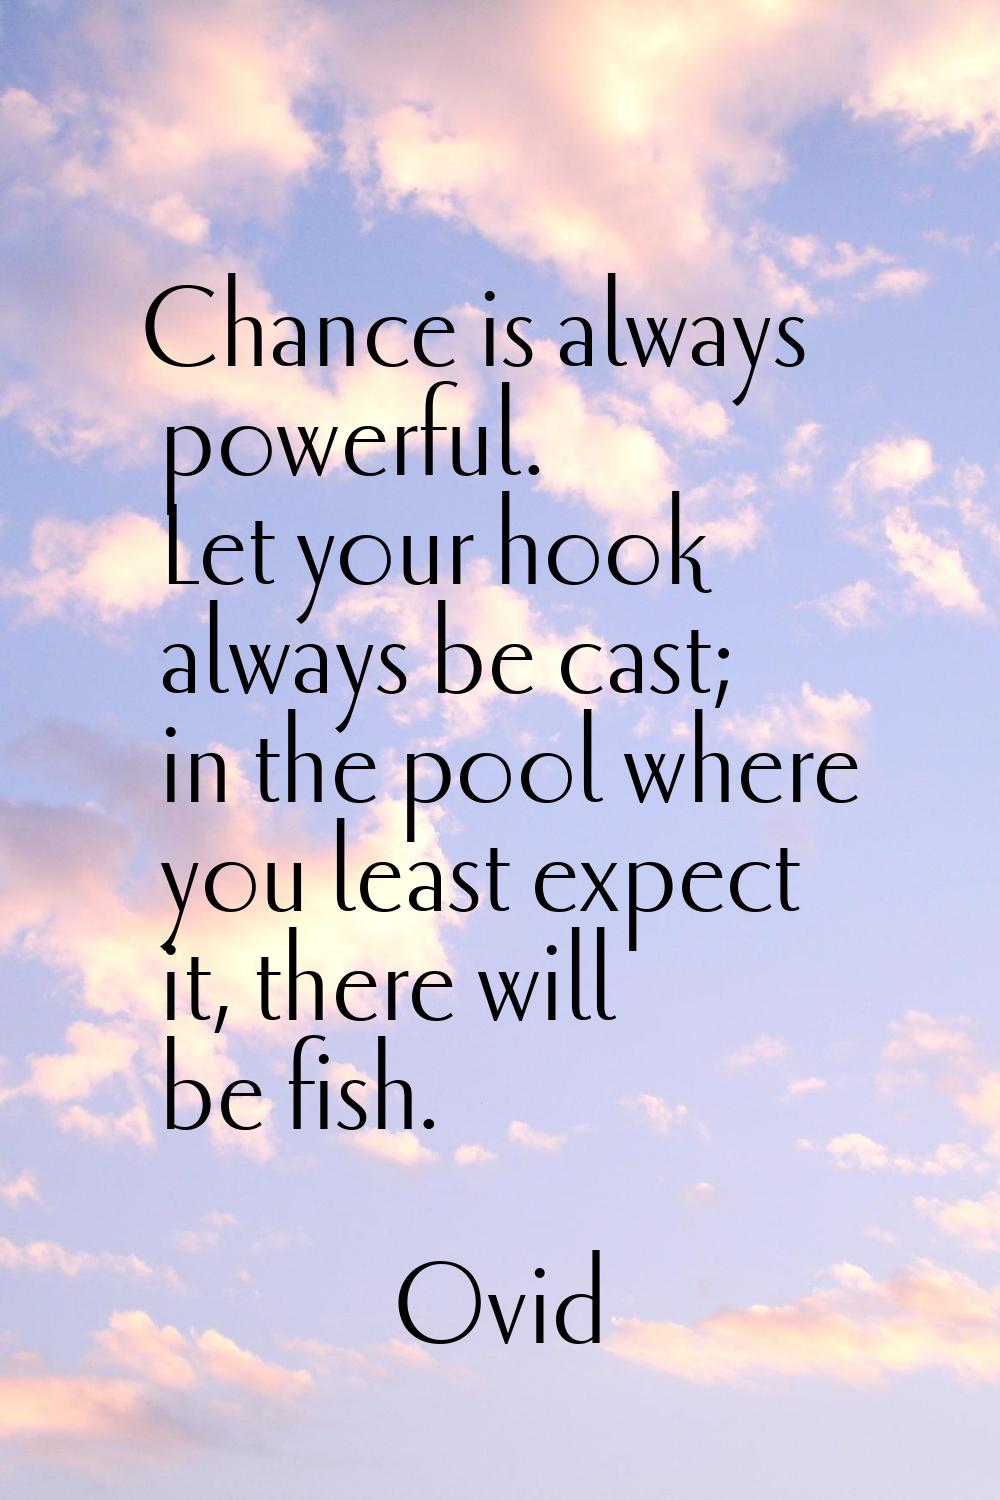 Chance is always powerful. Let your hook always be cast; in the pool where you least expect it, the